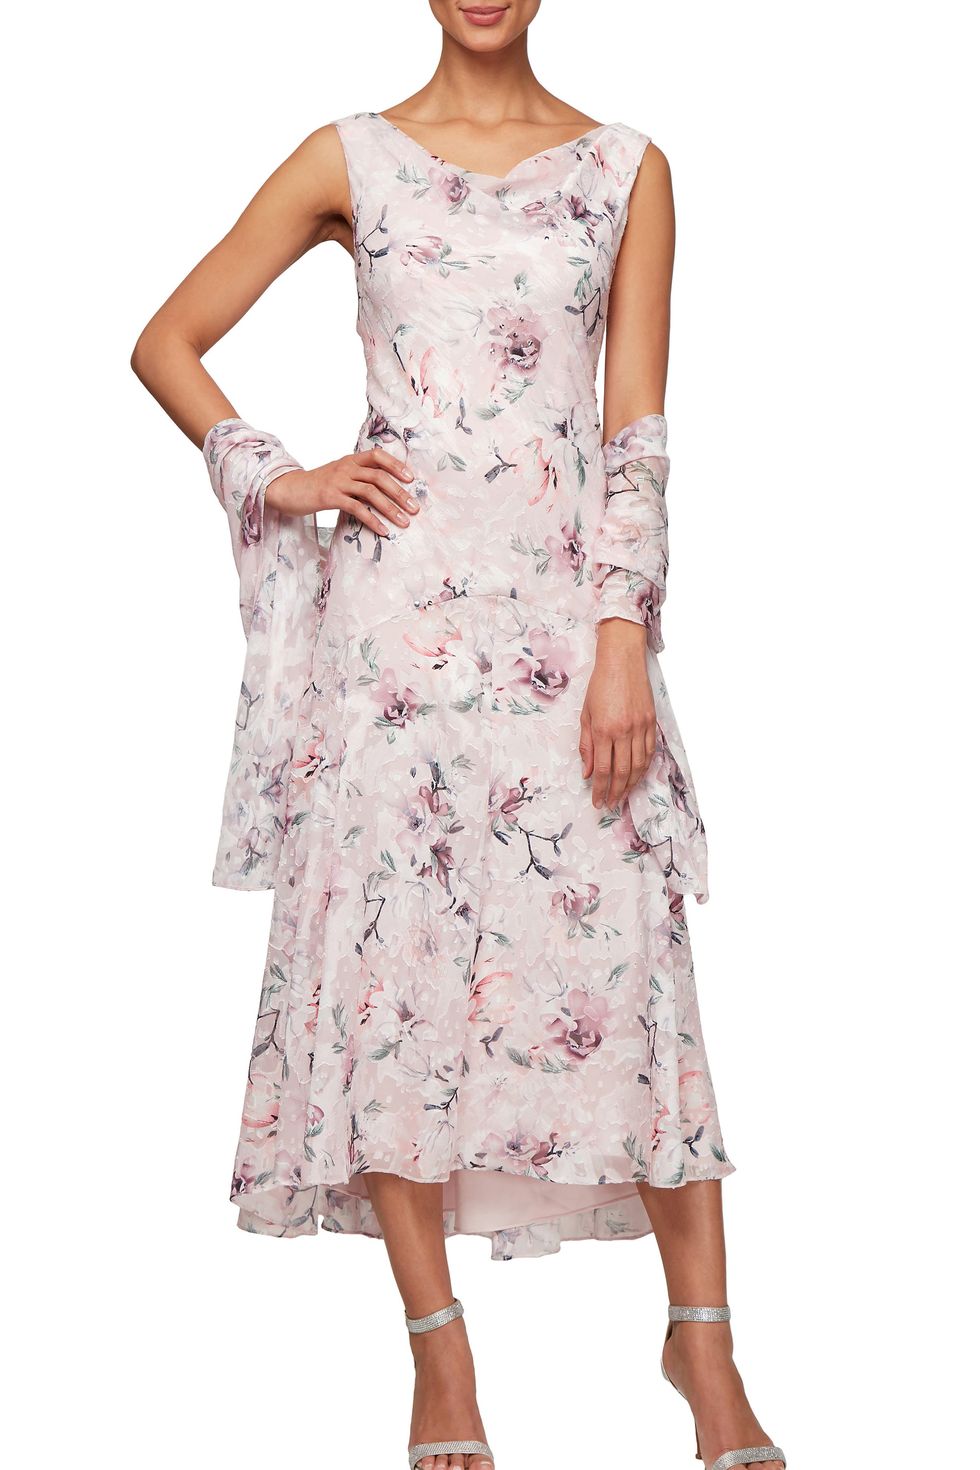 Mother of the Bride Dresses & Gowns at Neiman Marcus  Bride dress,  Mother of the bride dresses, Wedding dresses simple